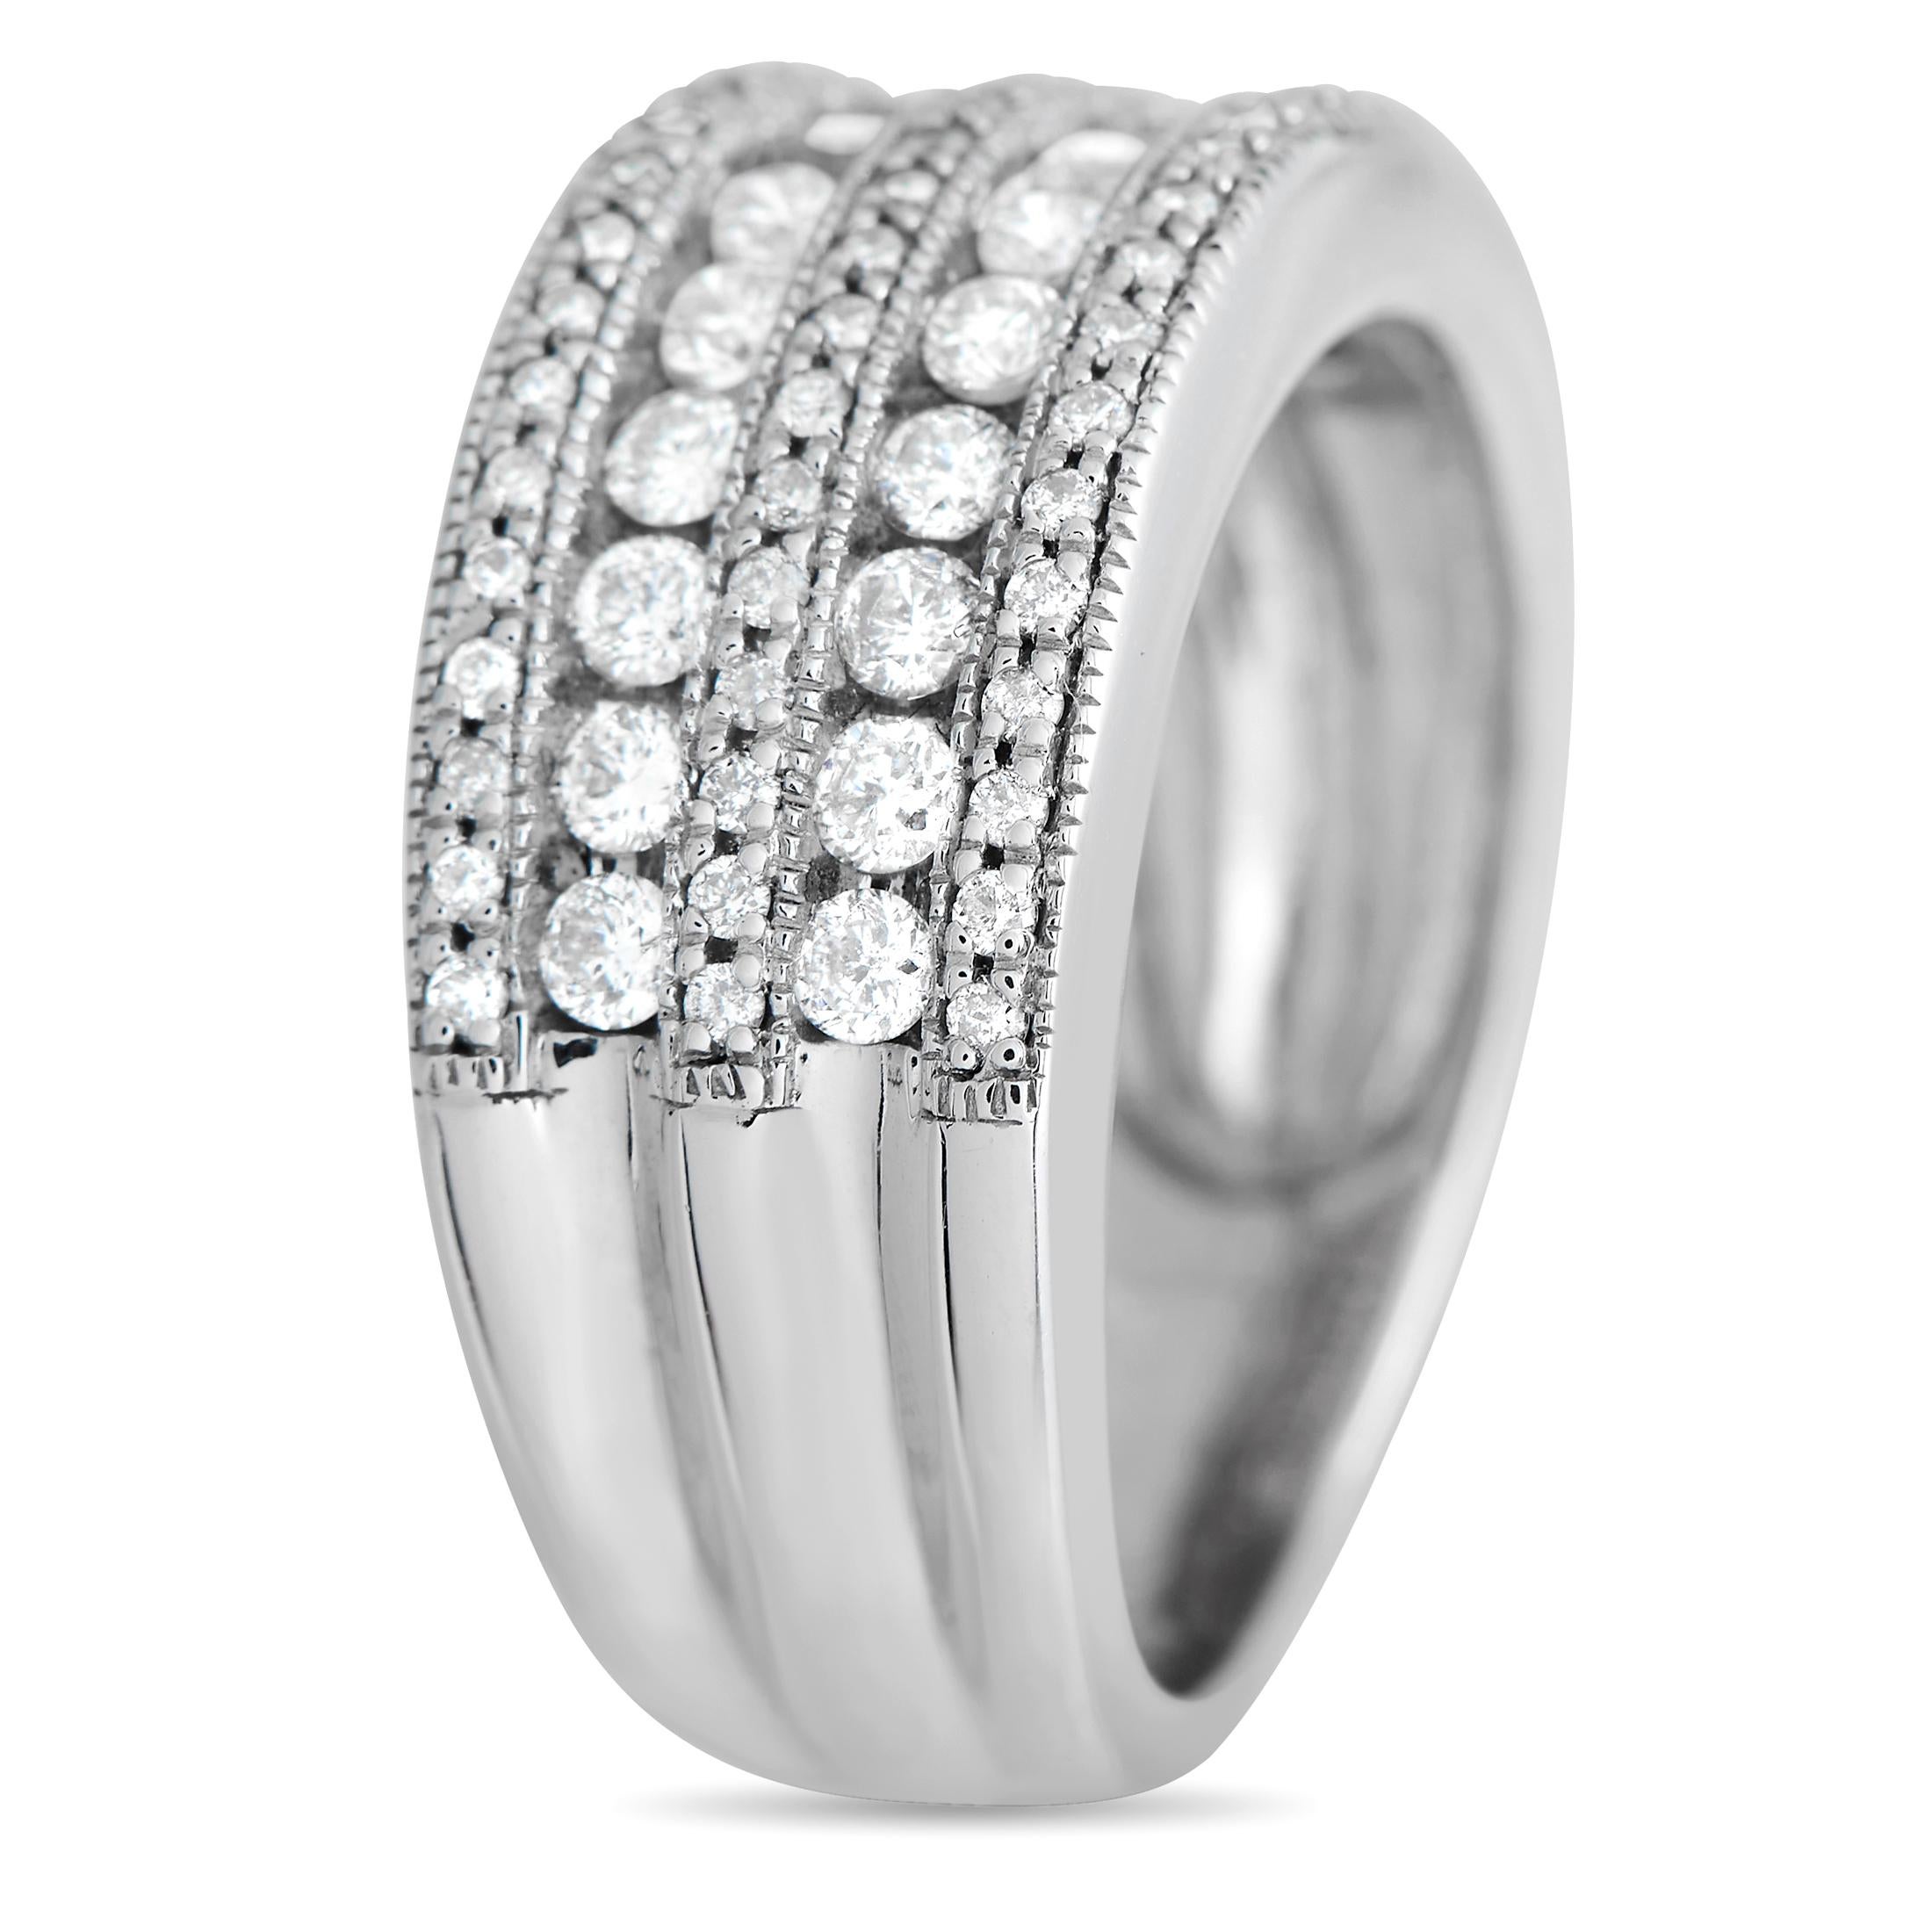 This luxurious ring is endlessly impressive. The sleek, sophisticated 14K White Gold setting is elegantly accented by rows of sparkling Diamonds with a total weight of 1.0 carats. Ideal for any occasion, it features a 5mm wide band and a comfortable